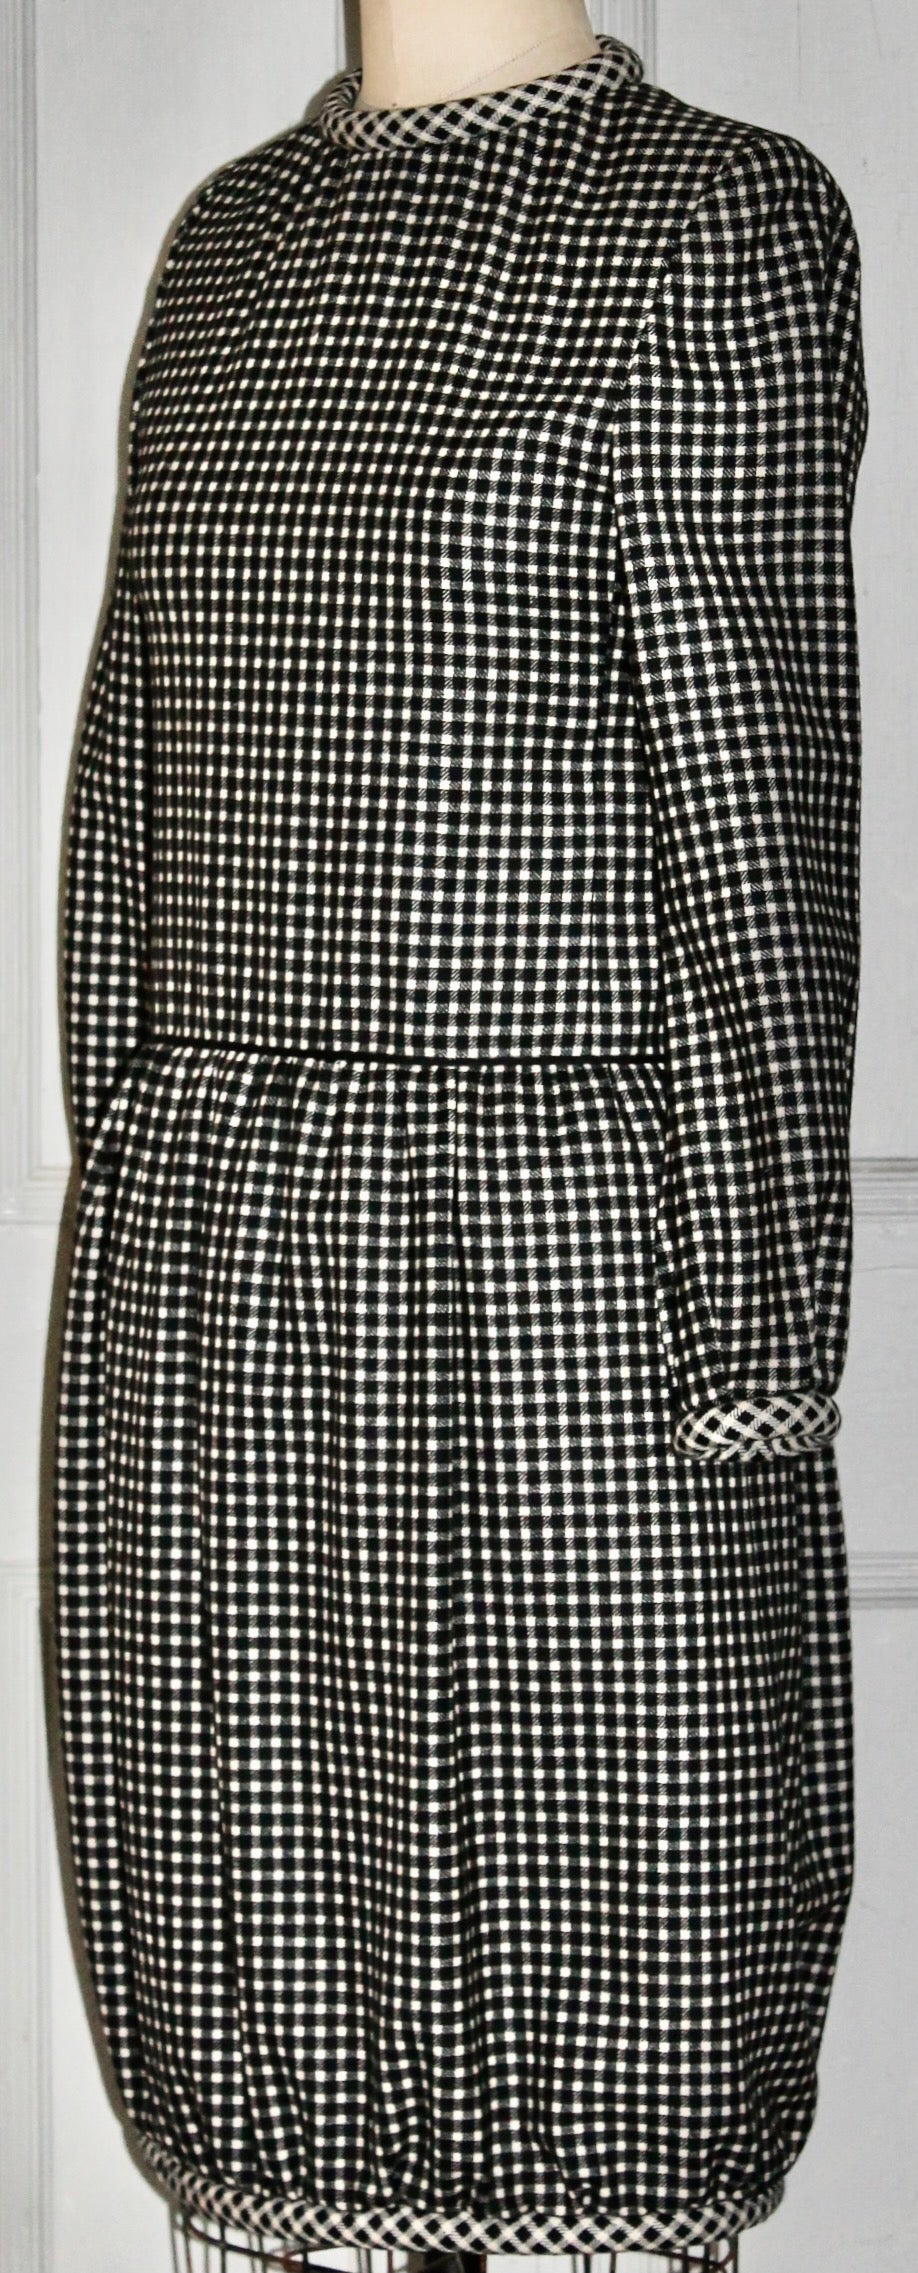 Offering a Nina Ricci 'Boutique' 100% Wool Dress. Rolled collar and rolled hem.  Fully lined.
